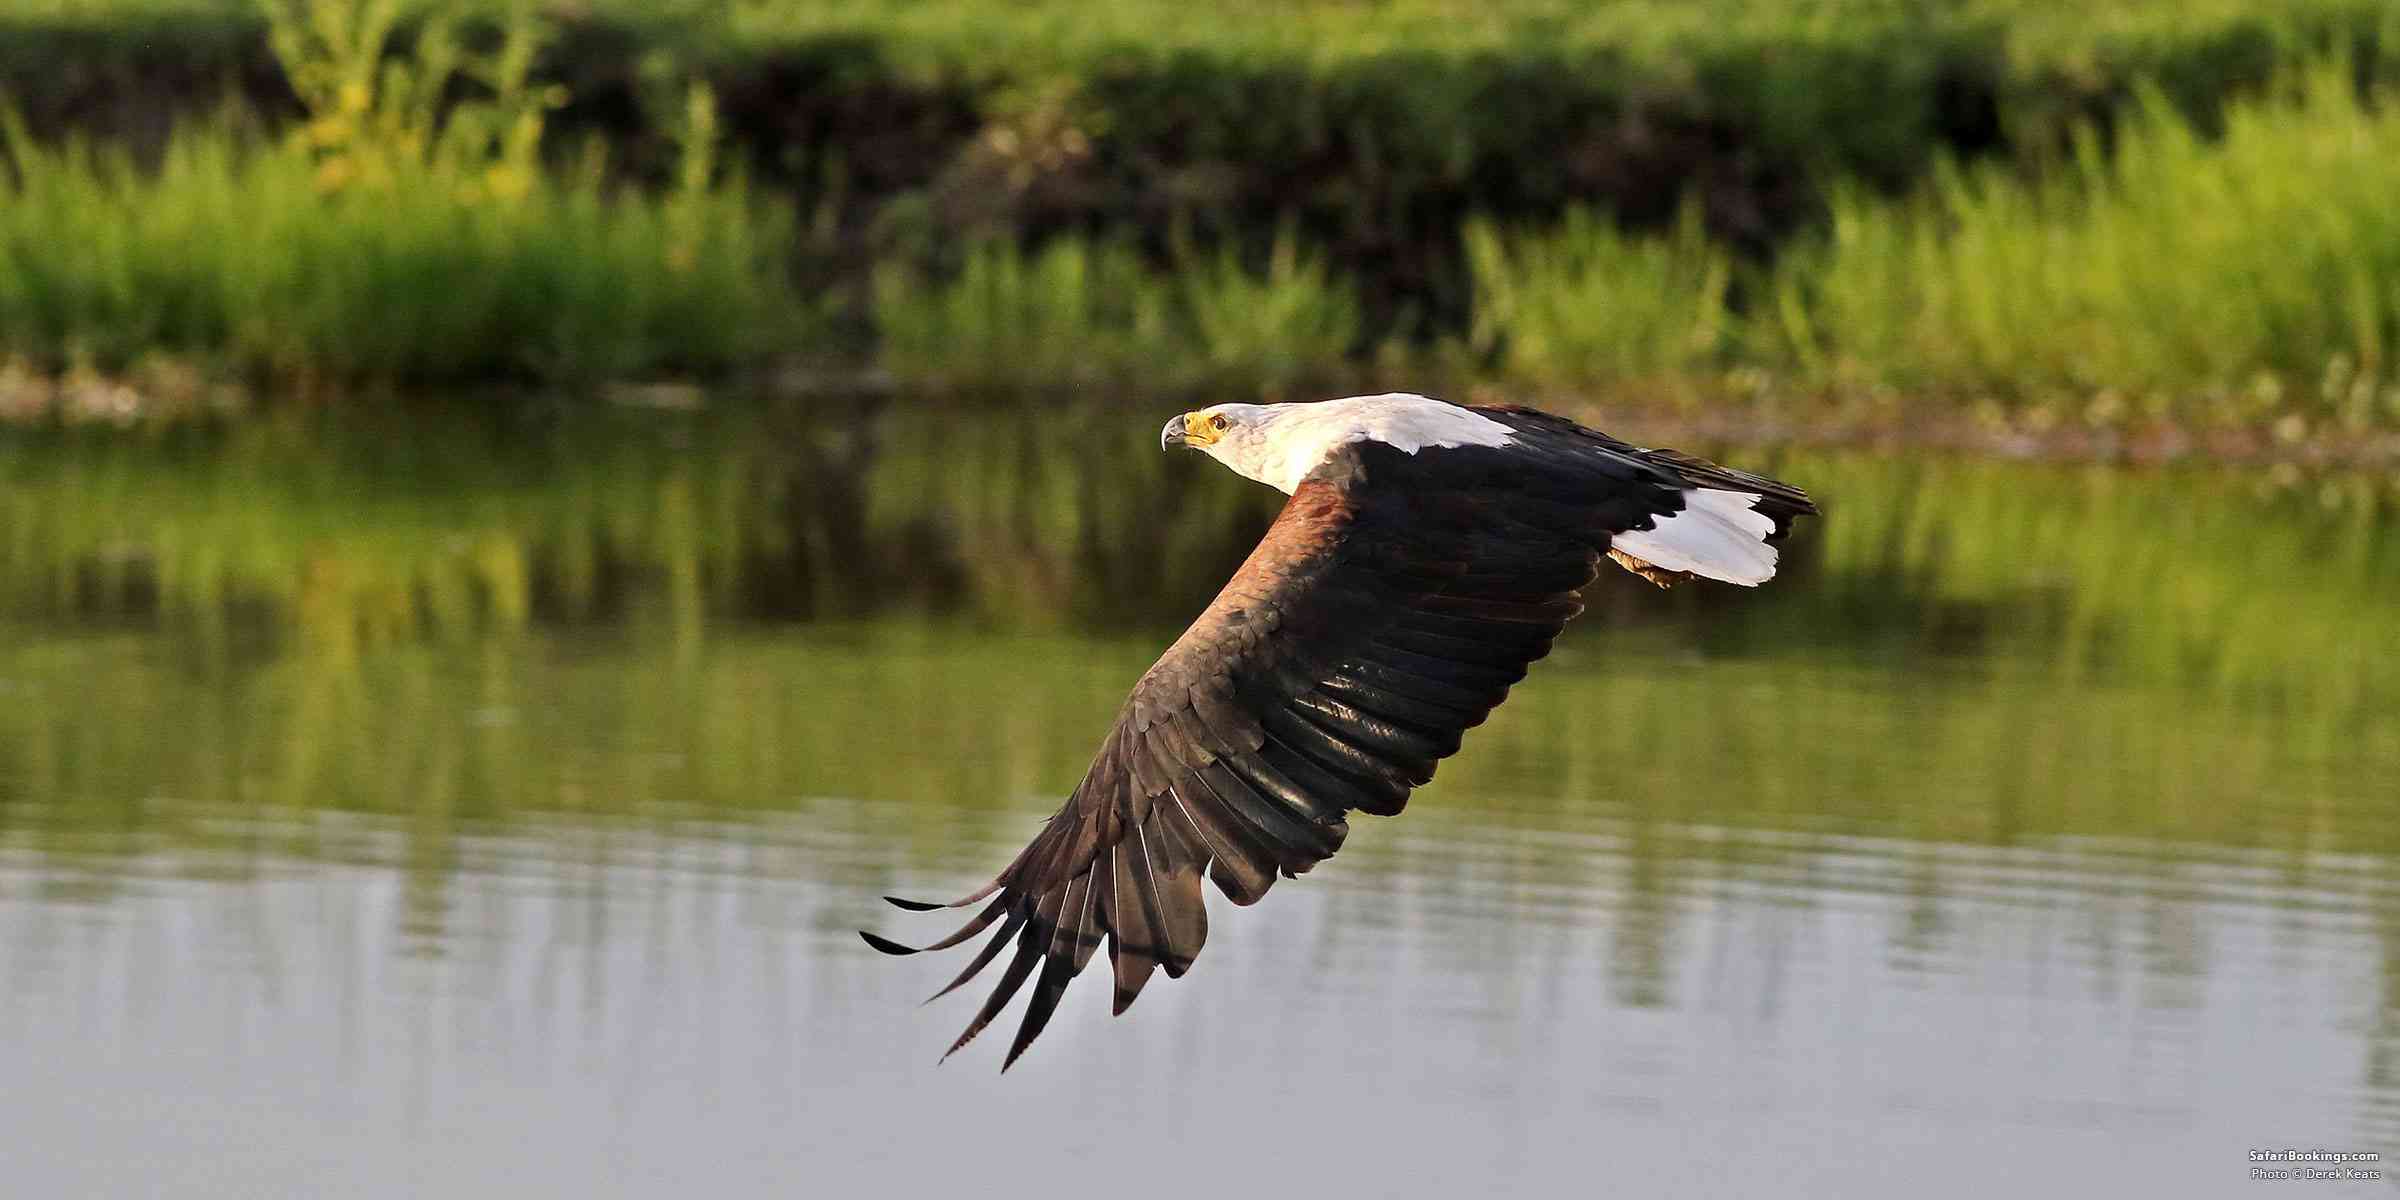 african eagle species